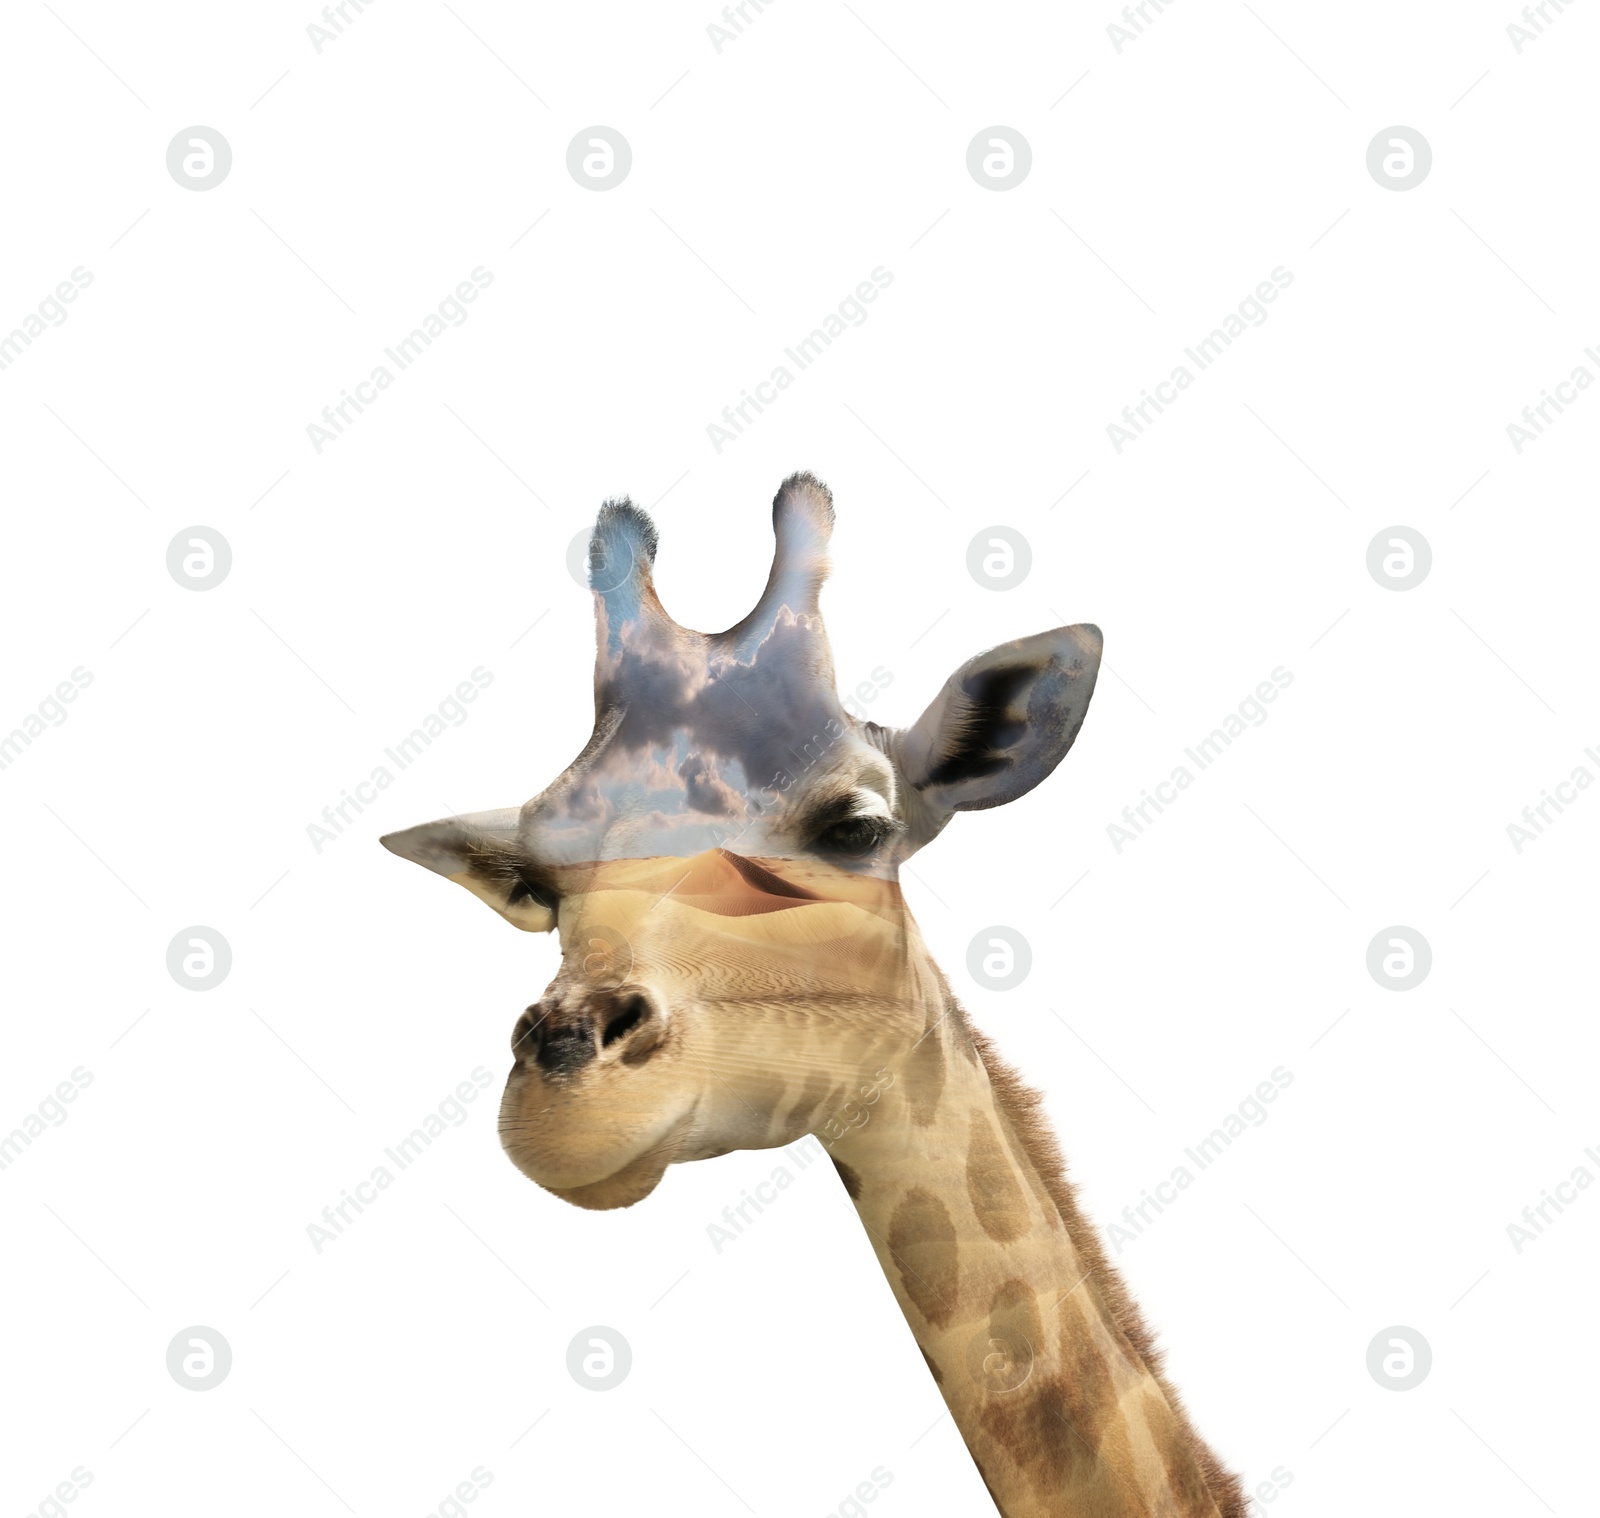 Image of Double exposure of spotted African giraffe and sandy desert